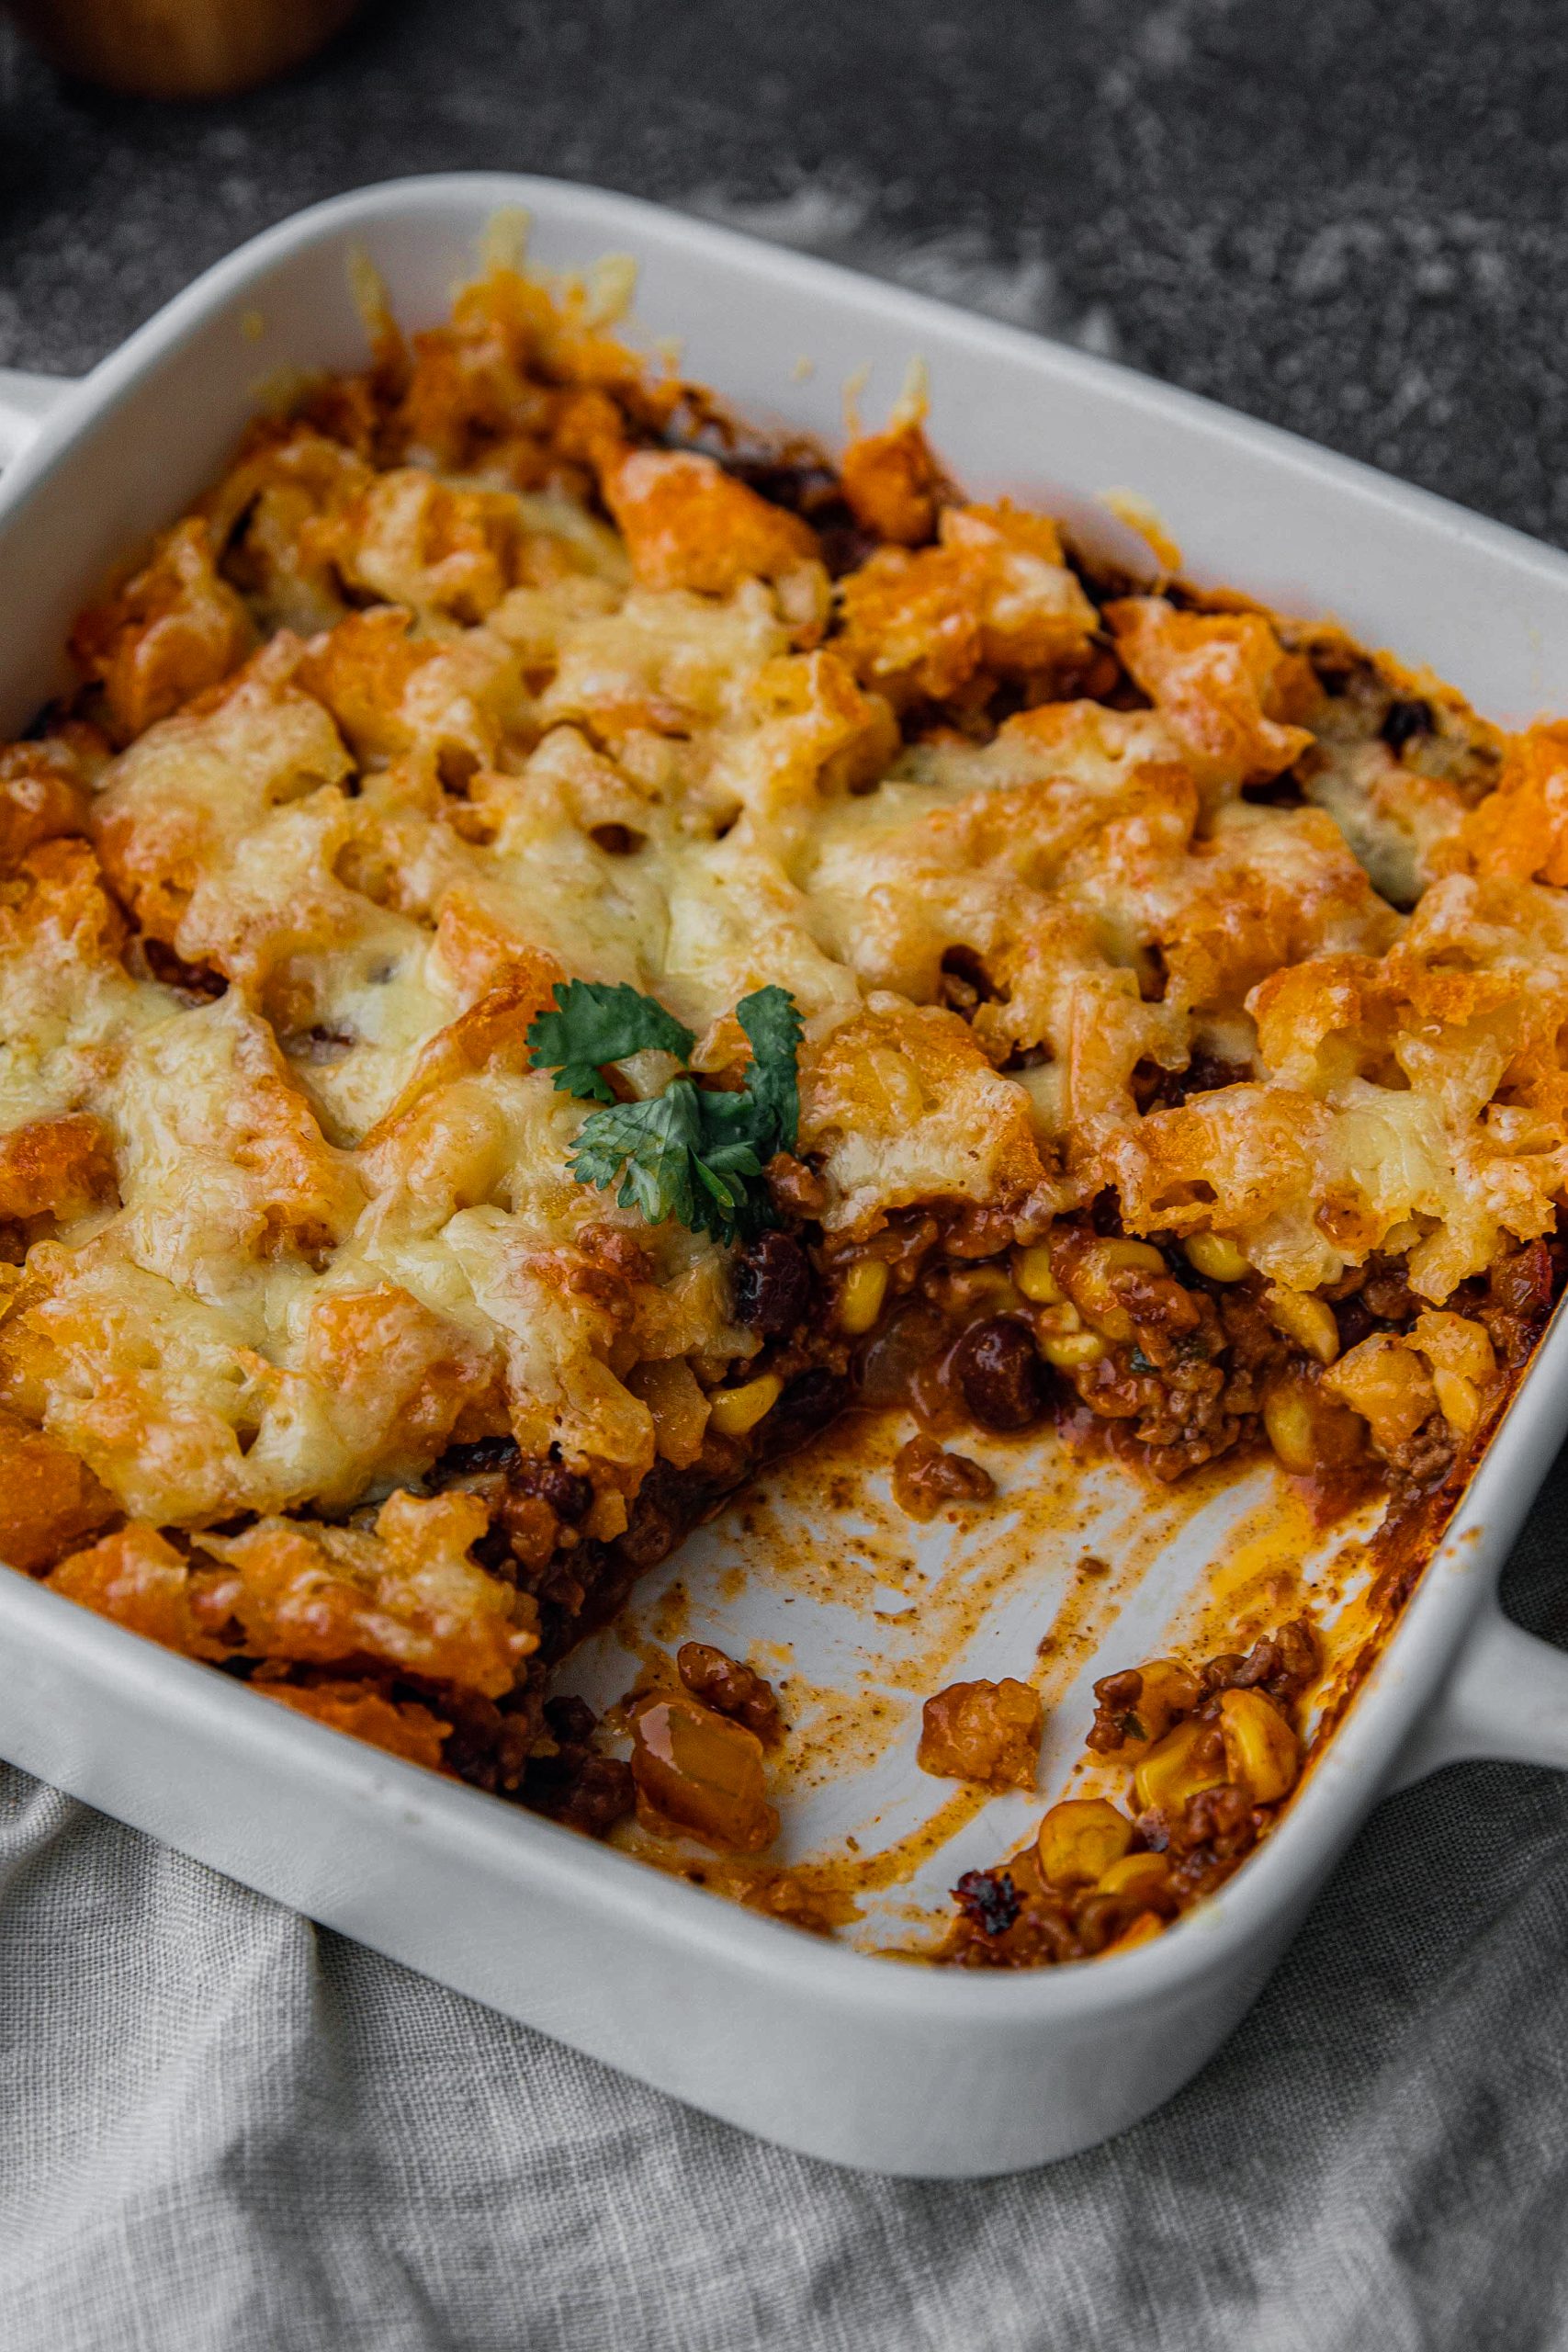 Mexican Tater Tot Casserole
